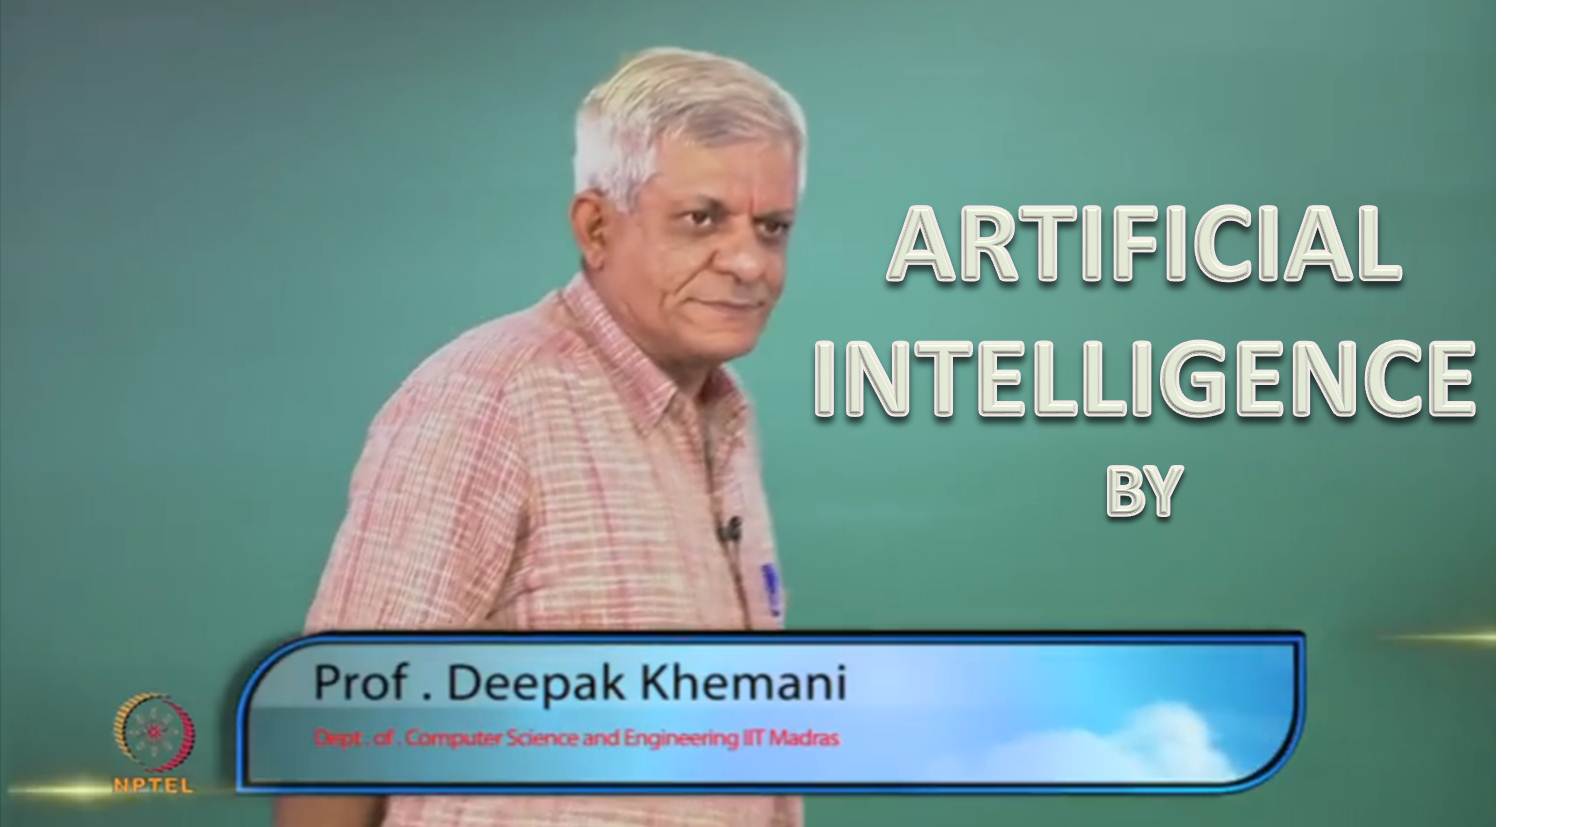 http://study.aisectonline.com/images/SubCategory/Lecture Series on Artificial Intelligence by Prof. Deepak Khemani, IIT Madras.jpg